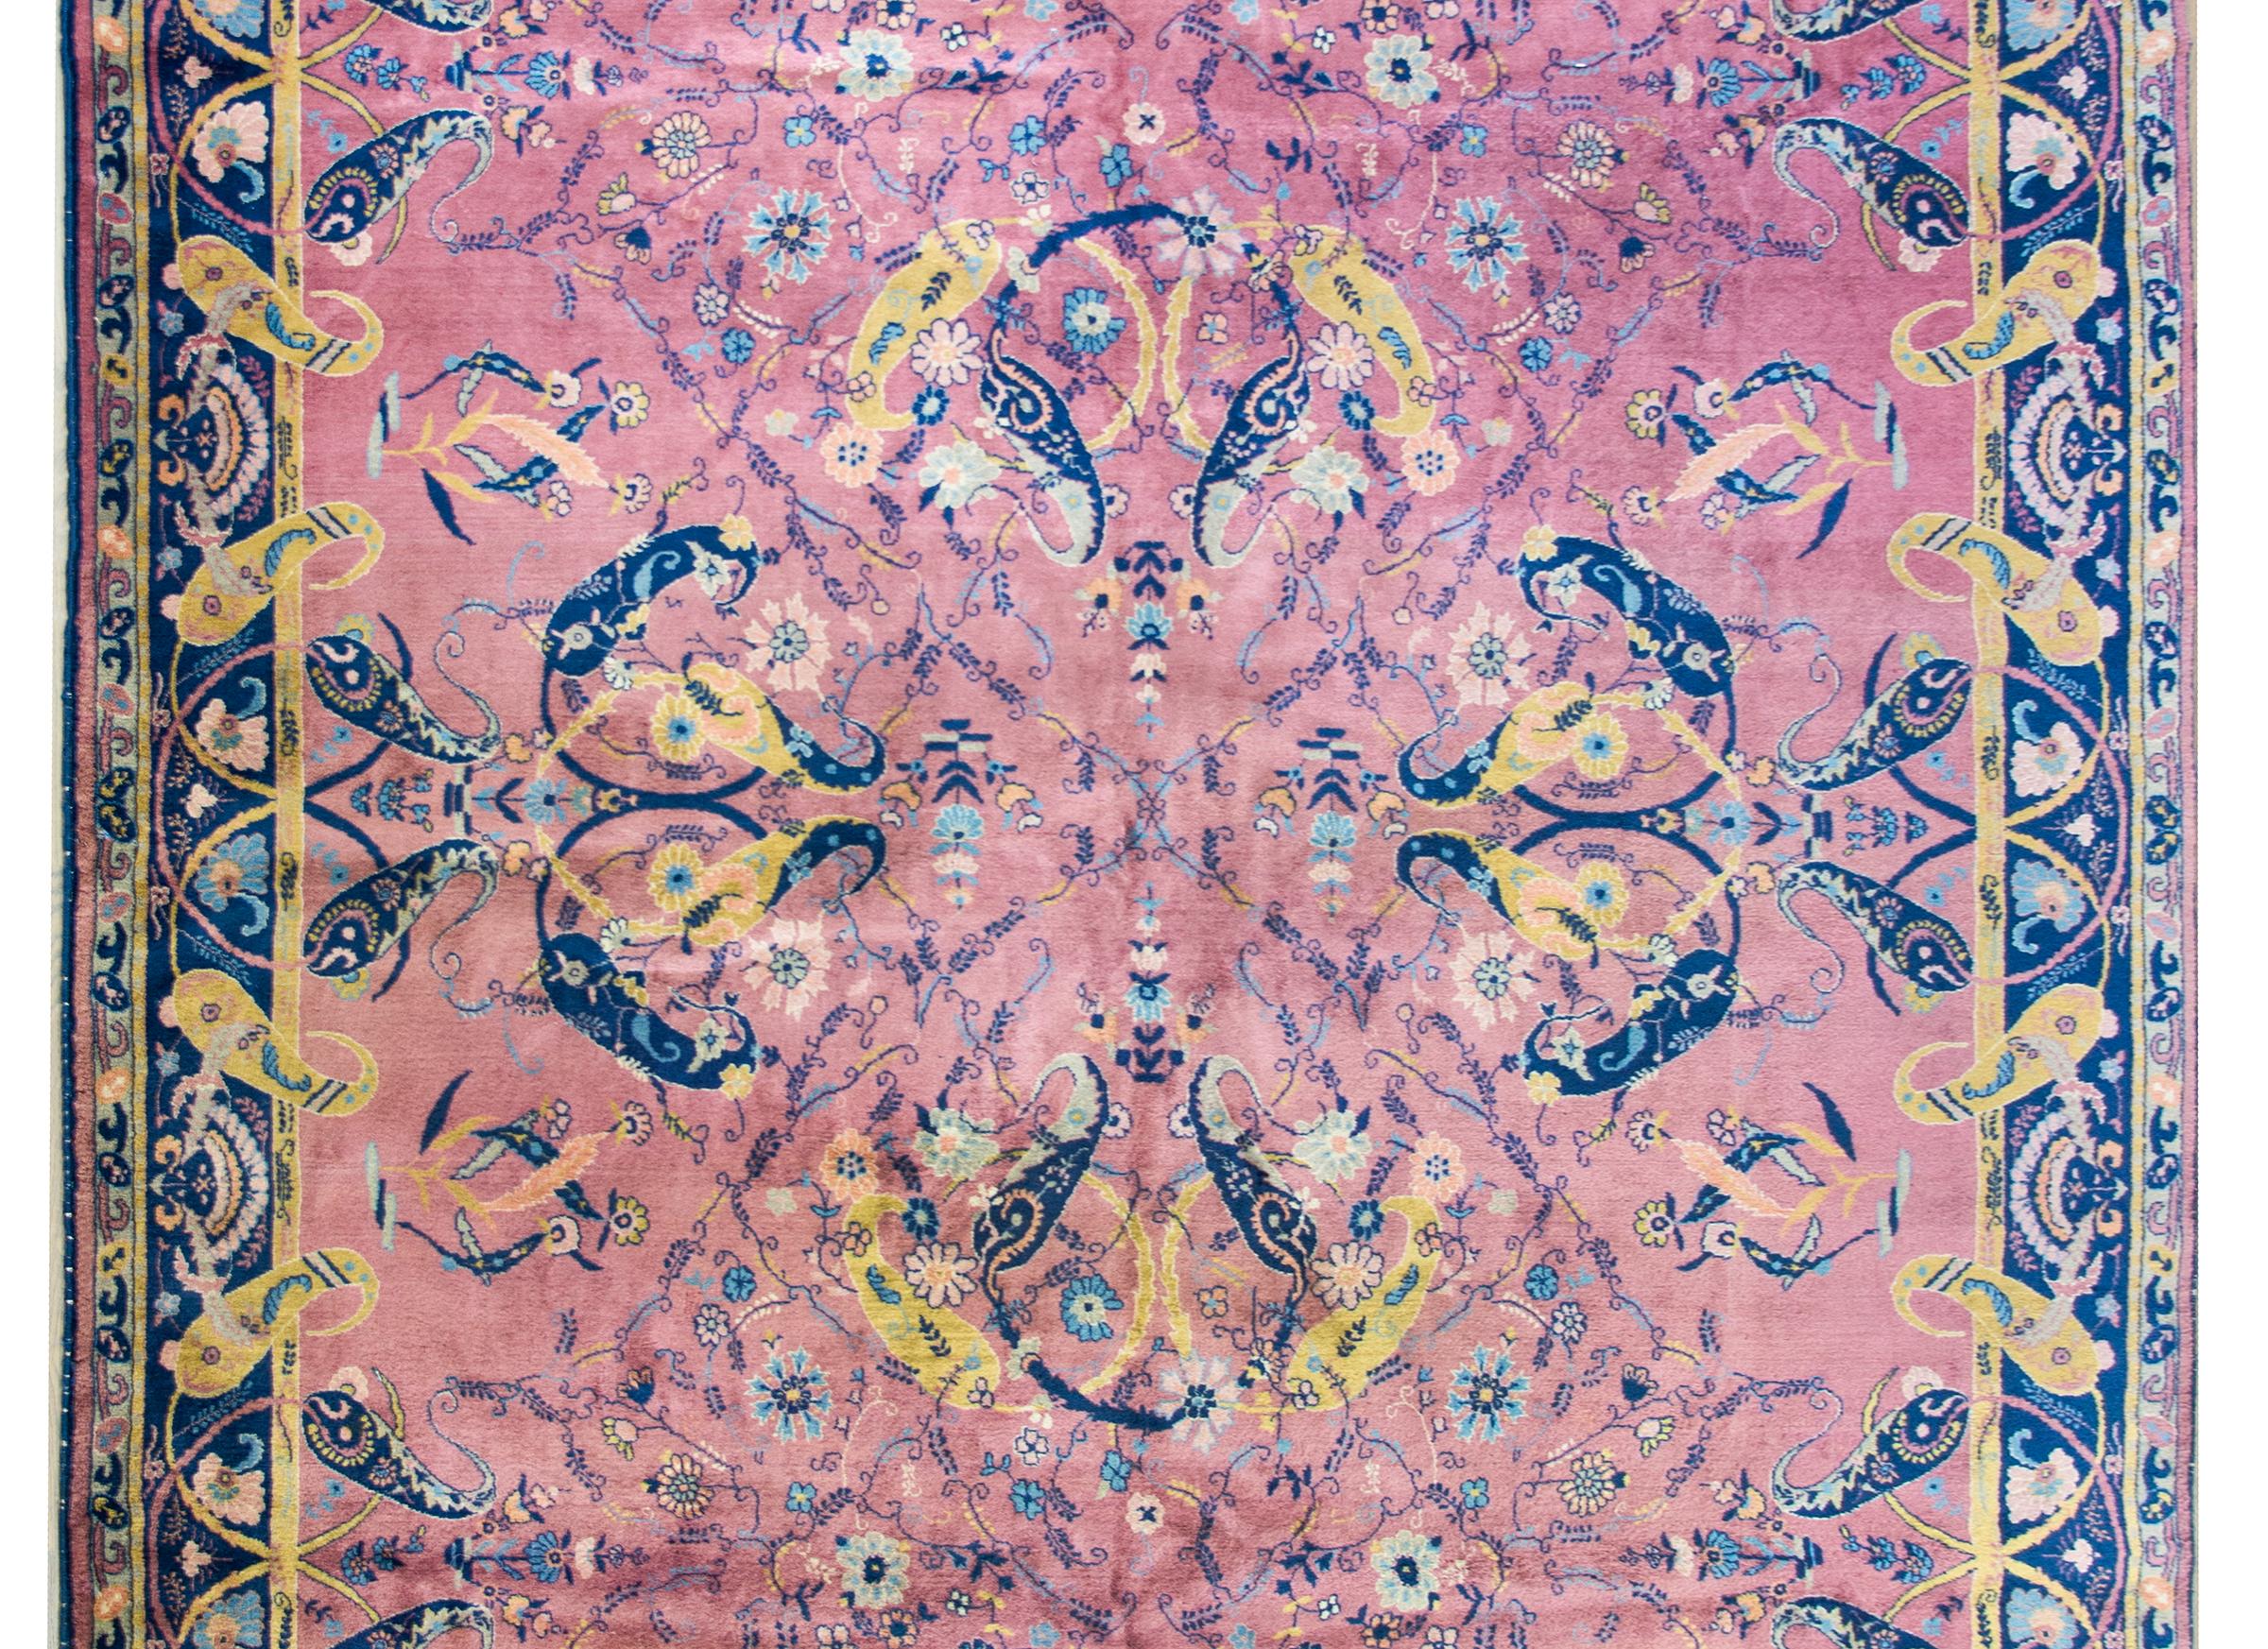 A beautiful early 20th century Indian Lahore rug with a large central medallion composed with swirling paisleys woven in indigo and gold, and living amidst a field of flowers, and all set against a pink background. The border is sensational with